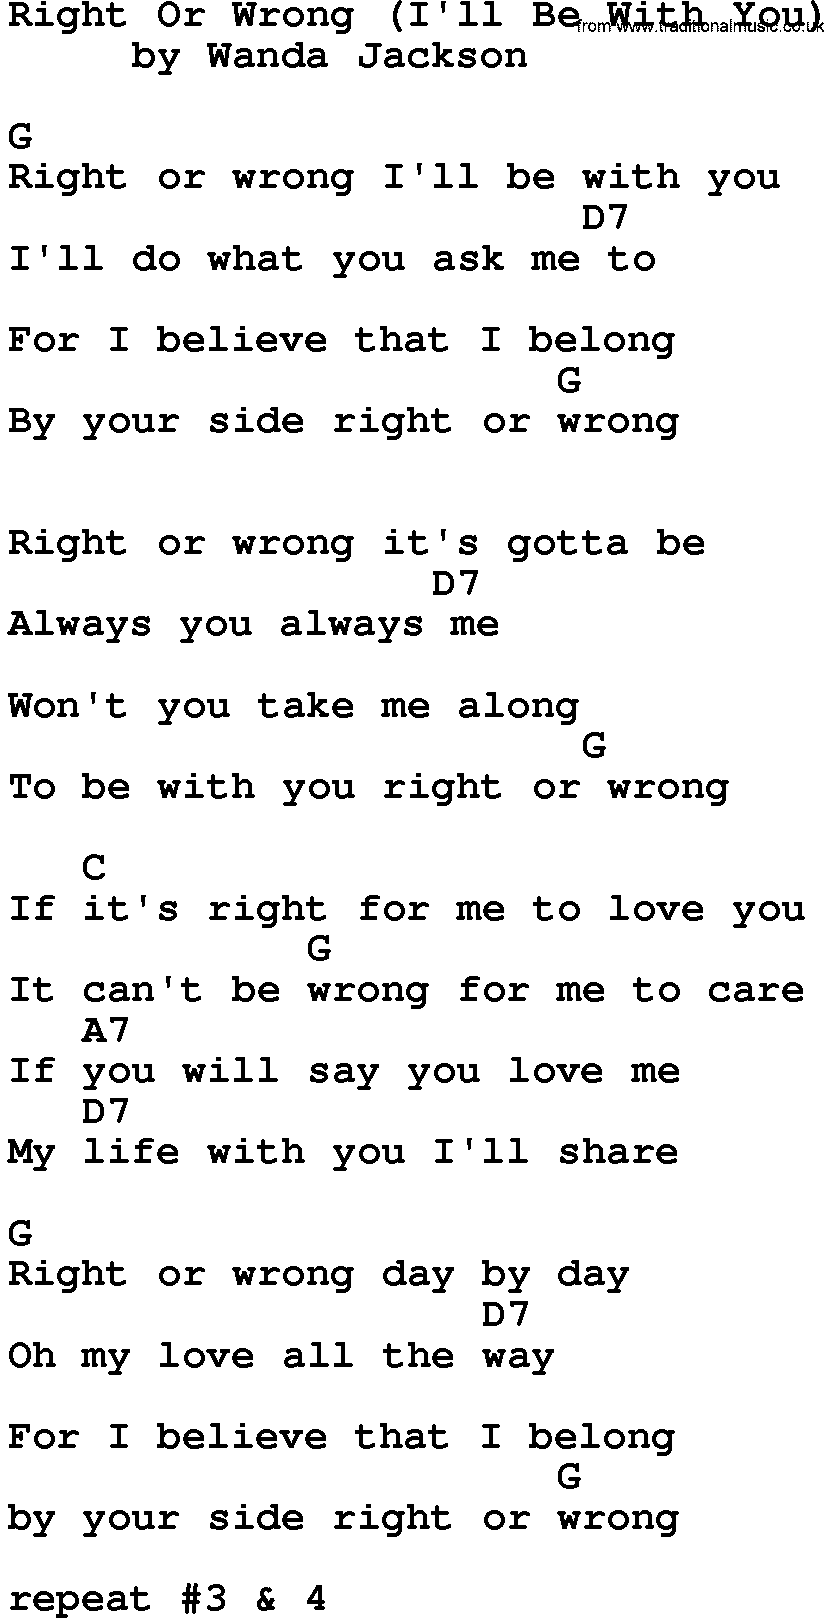 Country music song: Right Or Wrong(I'll Be With You) lyrics and chords